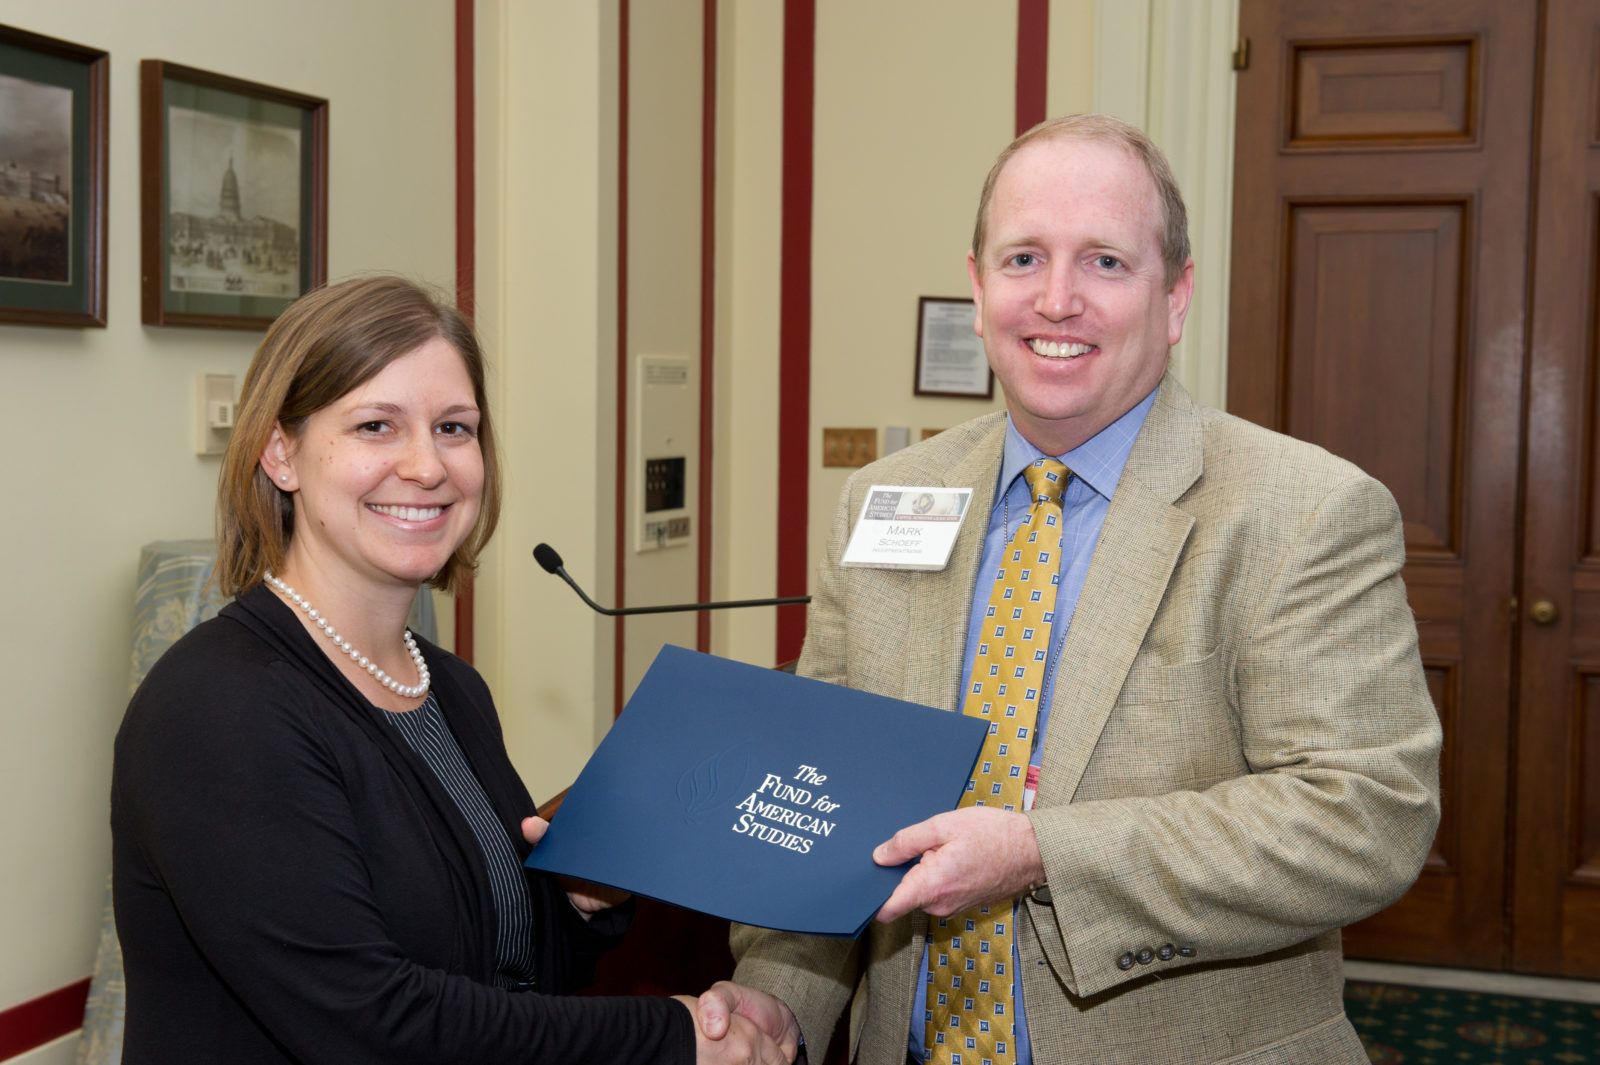 Capital Semester Director Lily Harrison presents IPJ Alumnus Mark A. Schoeff (J 89) with the Spring 2012 Outstanding Mentor Award